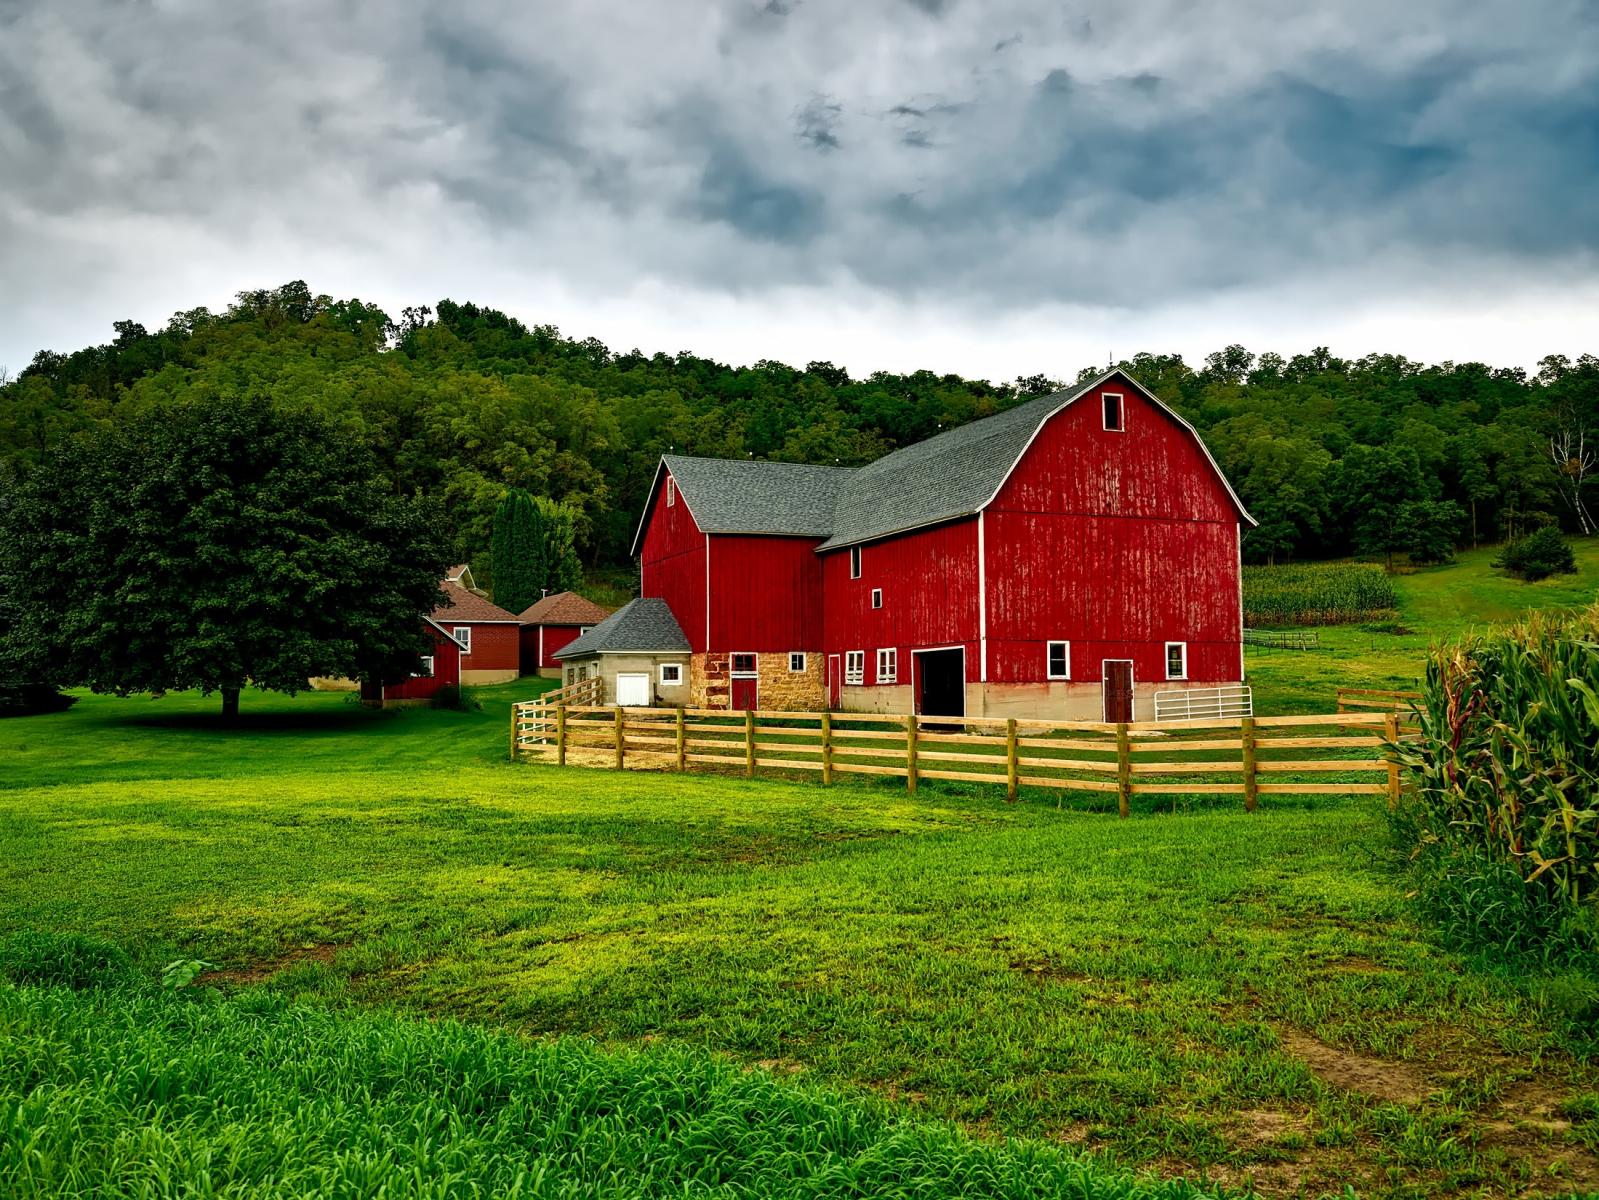 Red barn in the US. Photo credit: Pexels